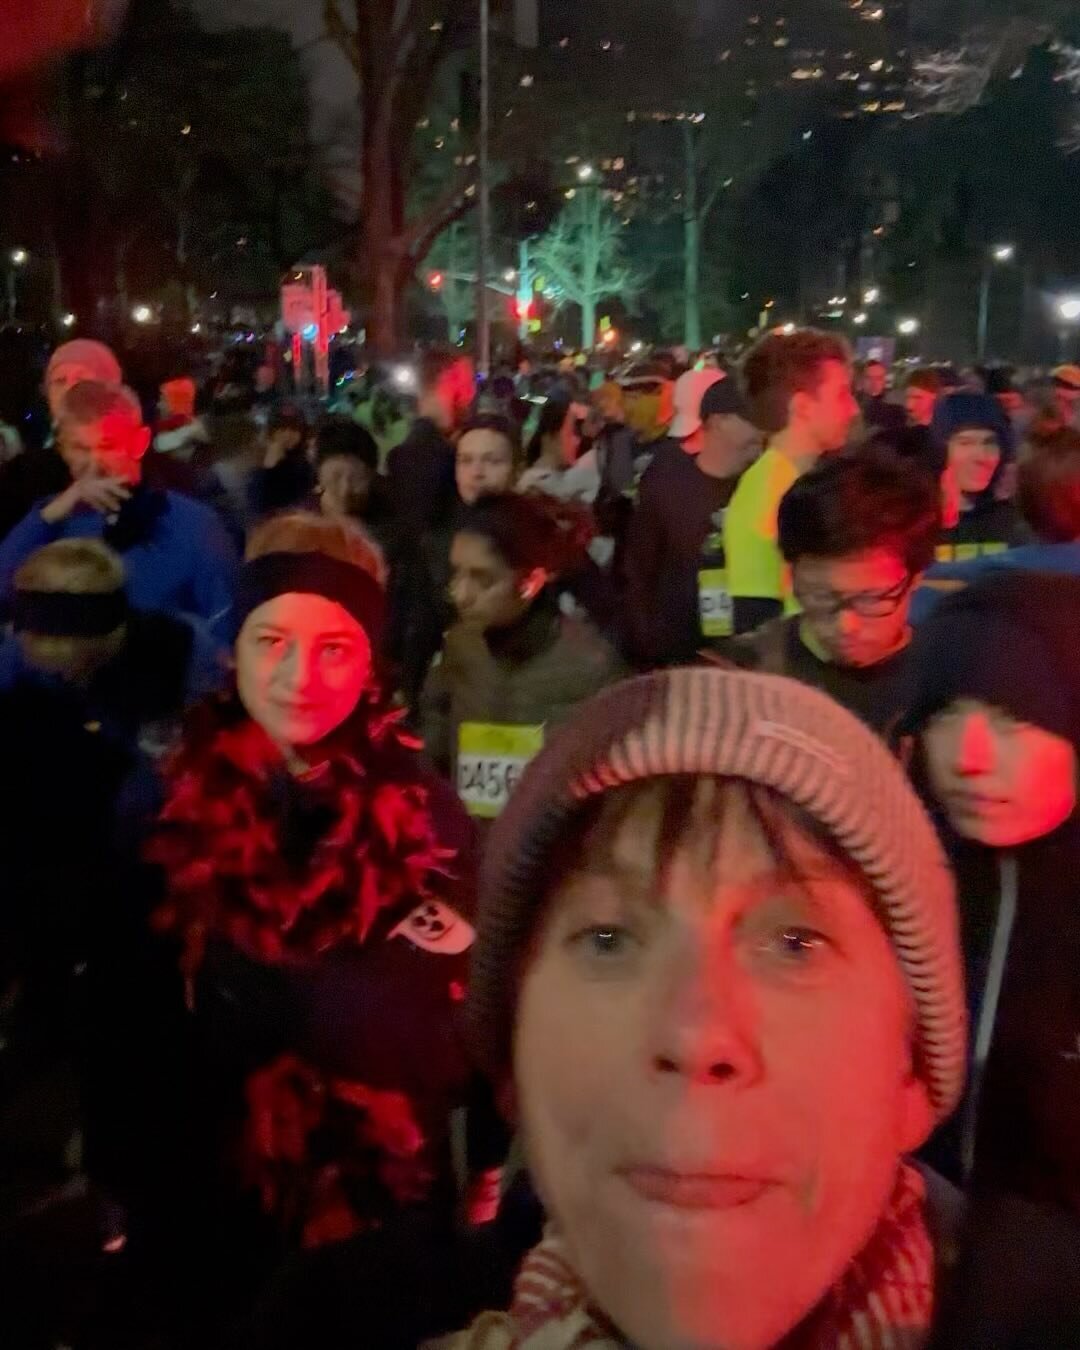 Four mile fast midnight run in central park with Eric Williams. Riddance with the 2023. Love NEW YORK ! Its the mess that is us. ) Happy New Year.

  @ericwilliams8694 @nyrr